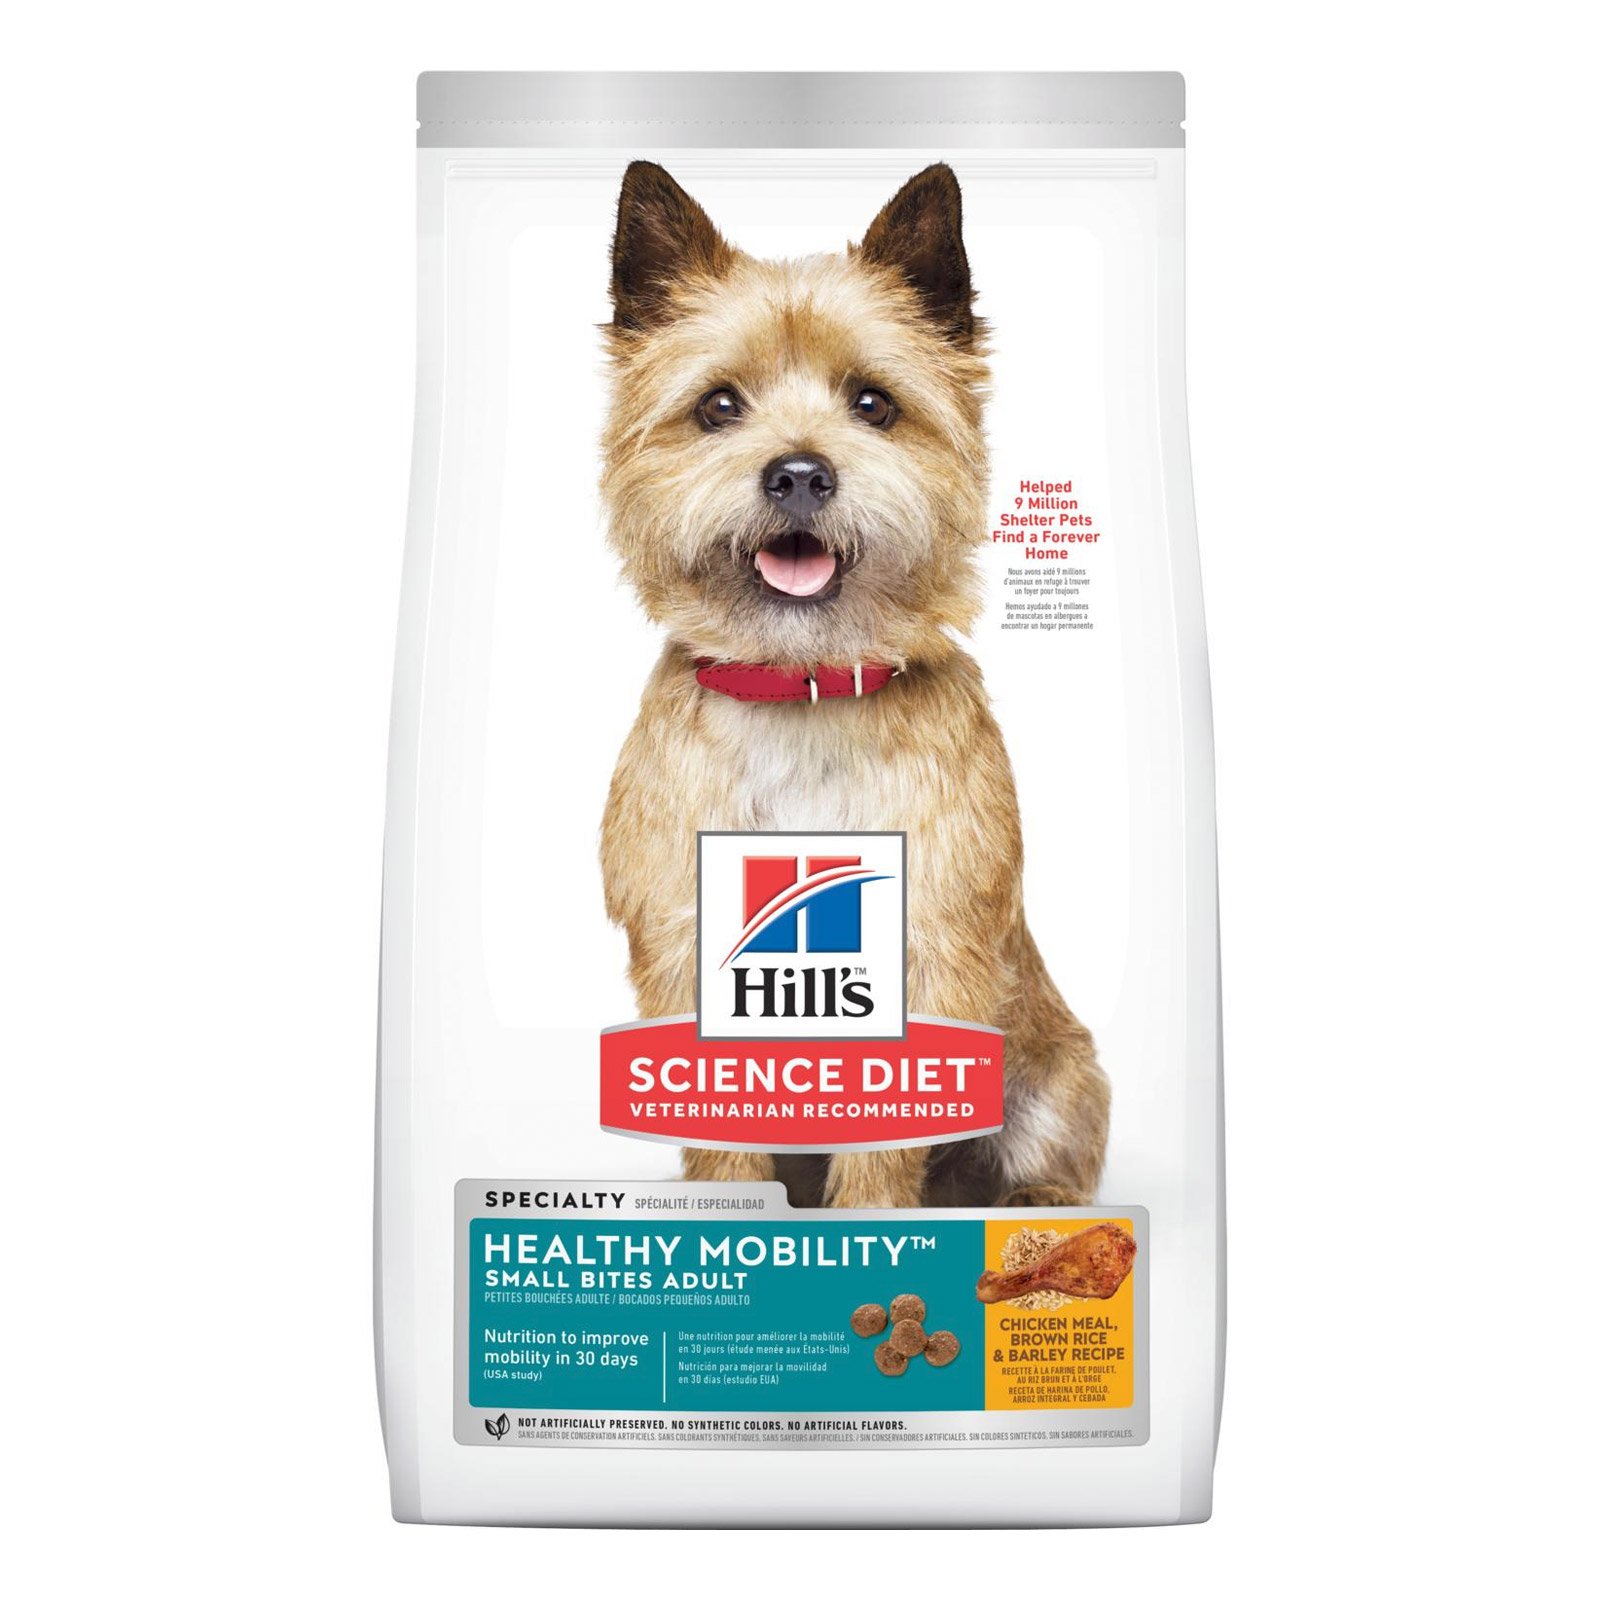 Hill's Science Diet Adult Healthy Mobility Small Bites Dog Food 7.03 Kg